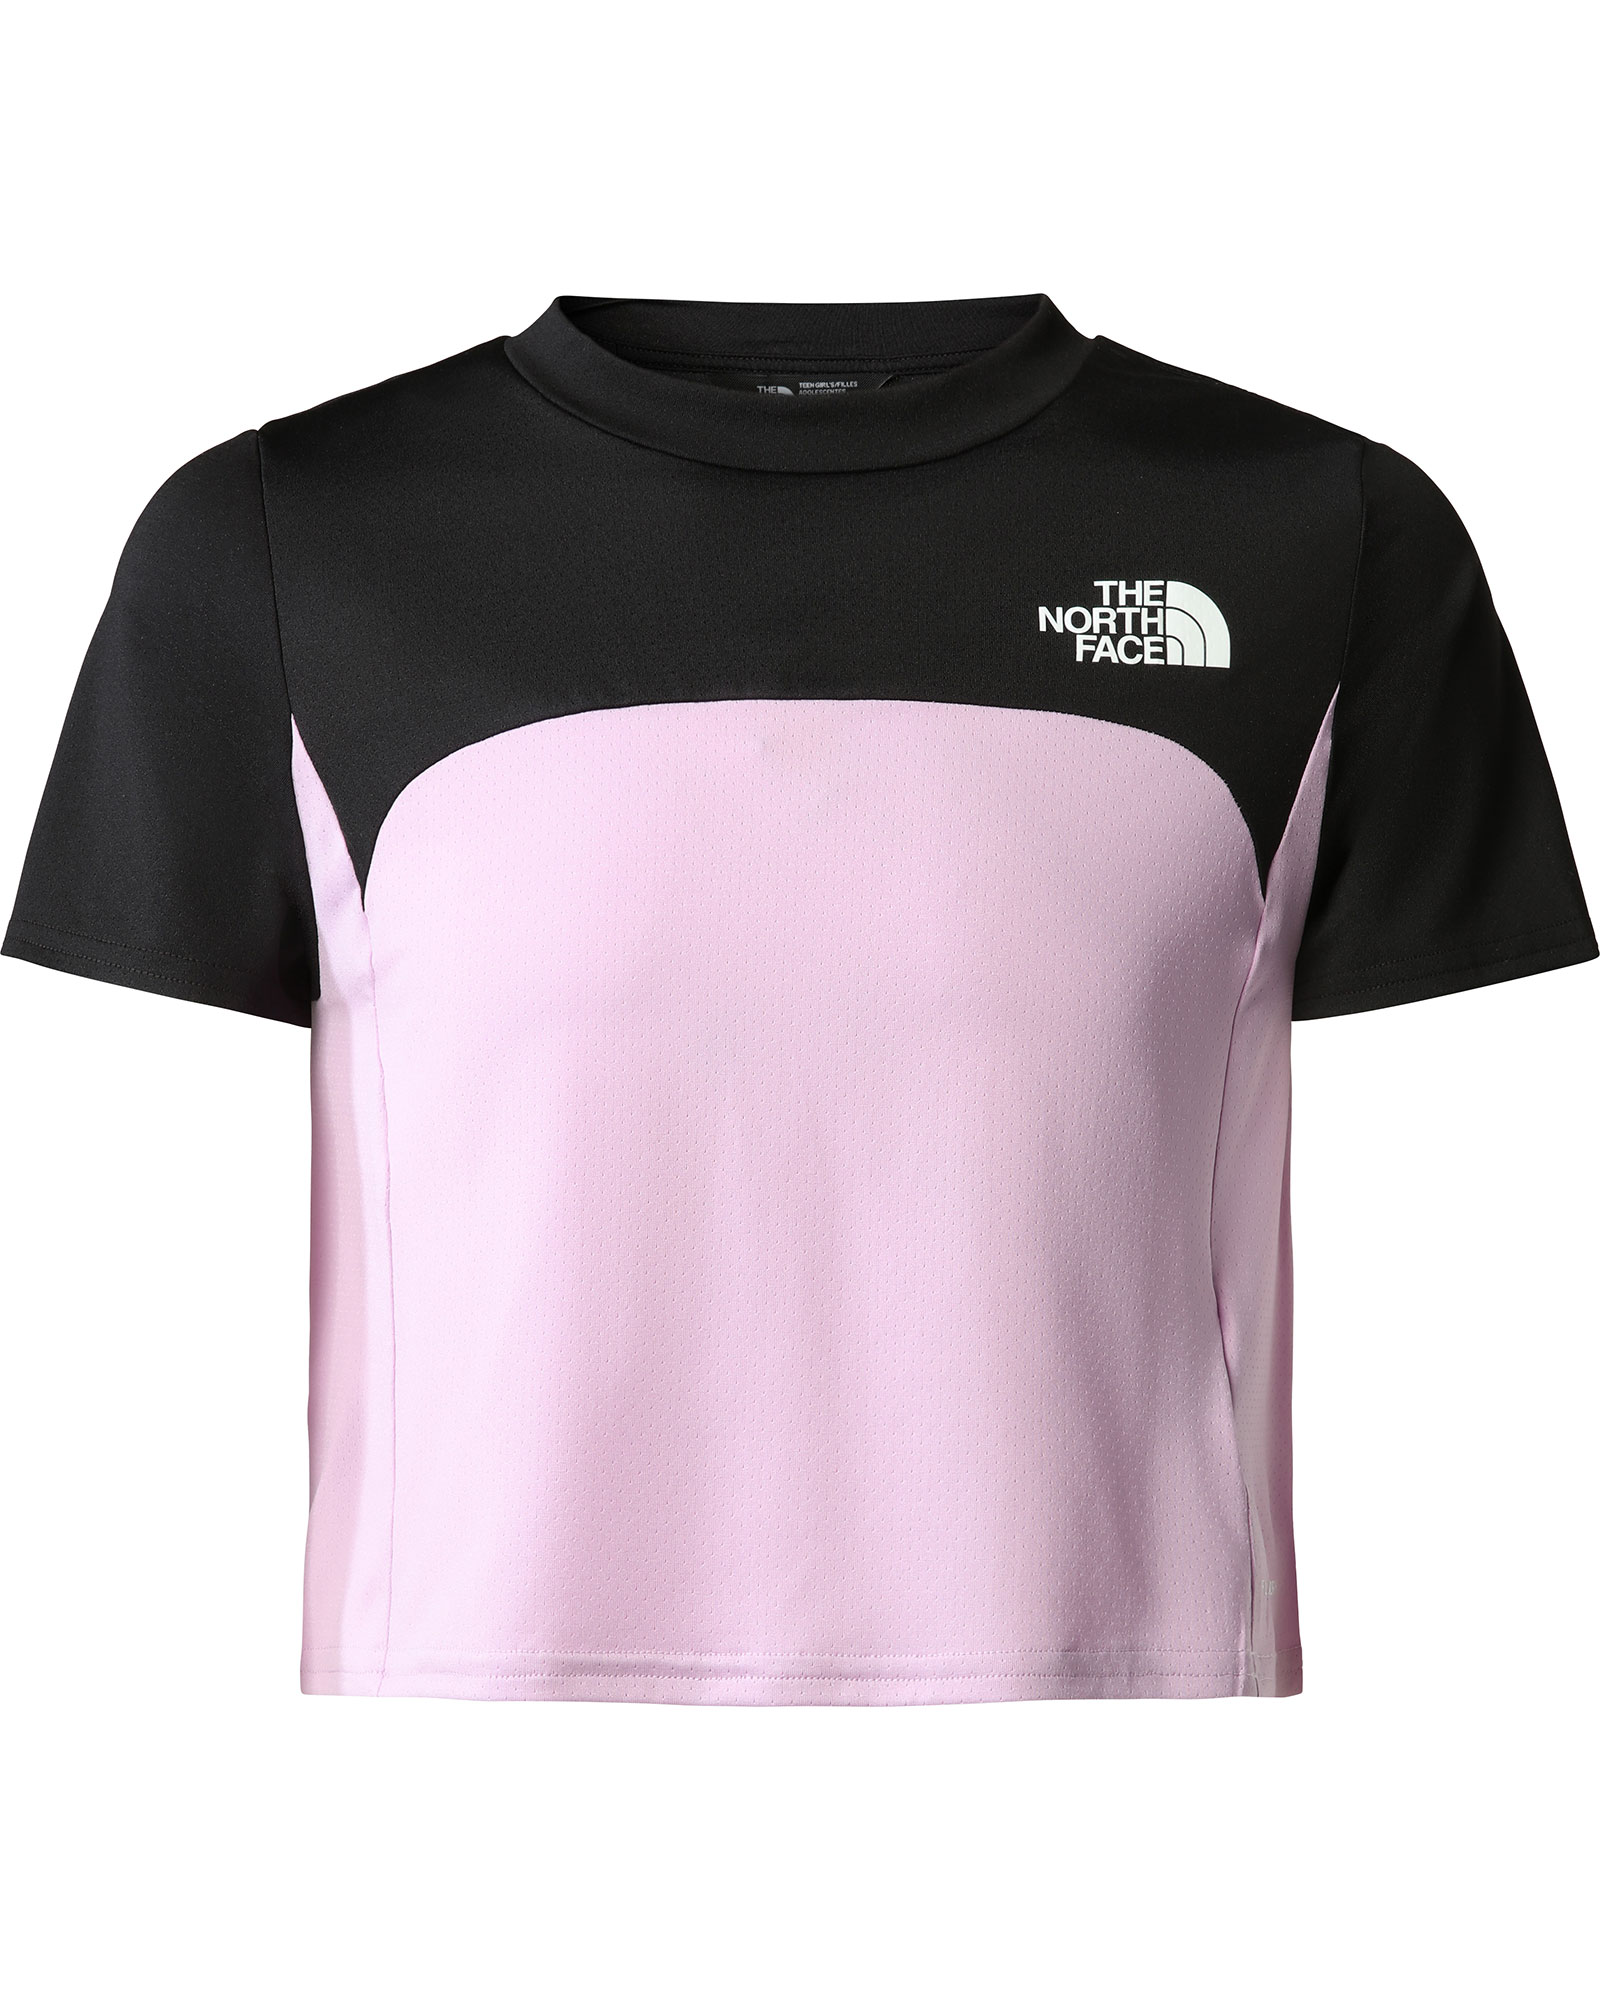 The North Face Girl’s Mountain Athletics T Shirt - Lupine S